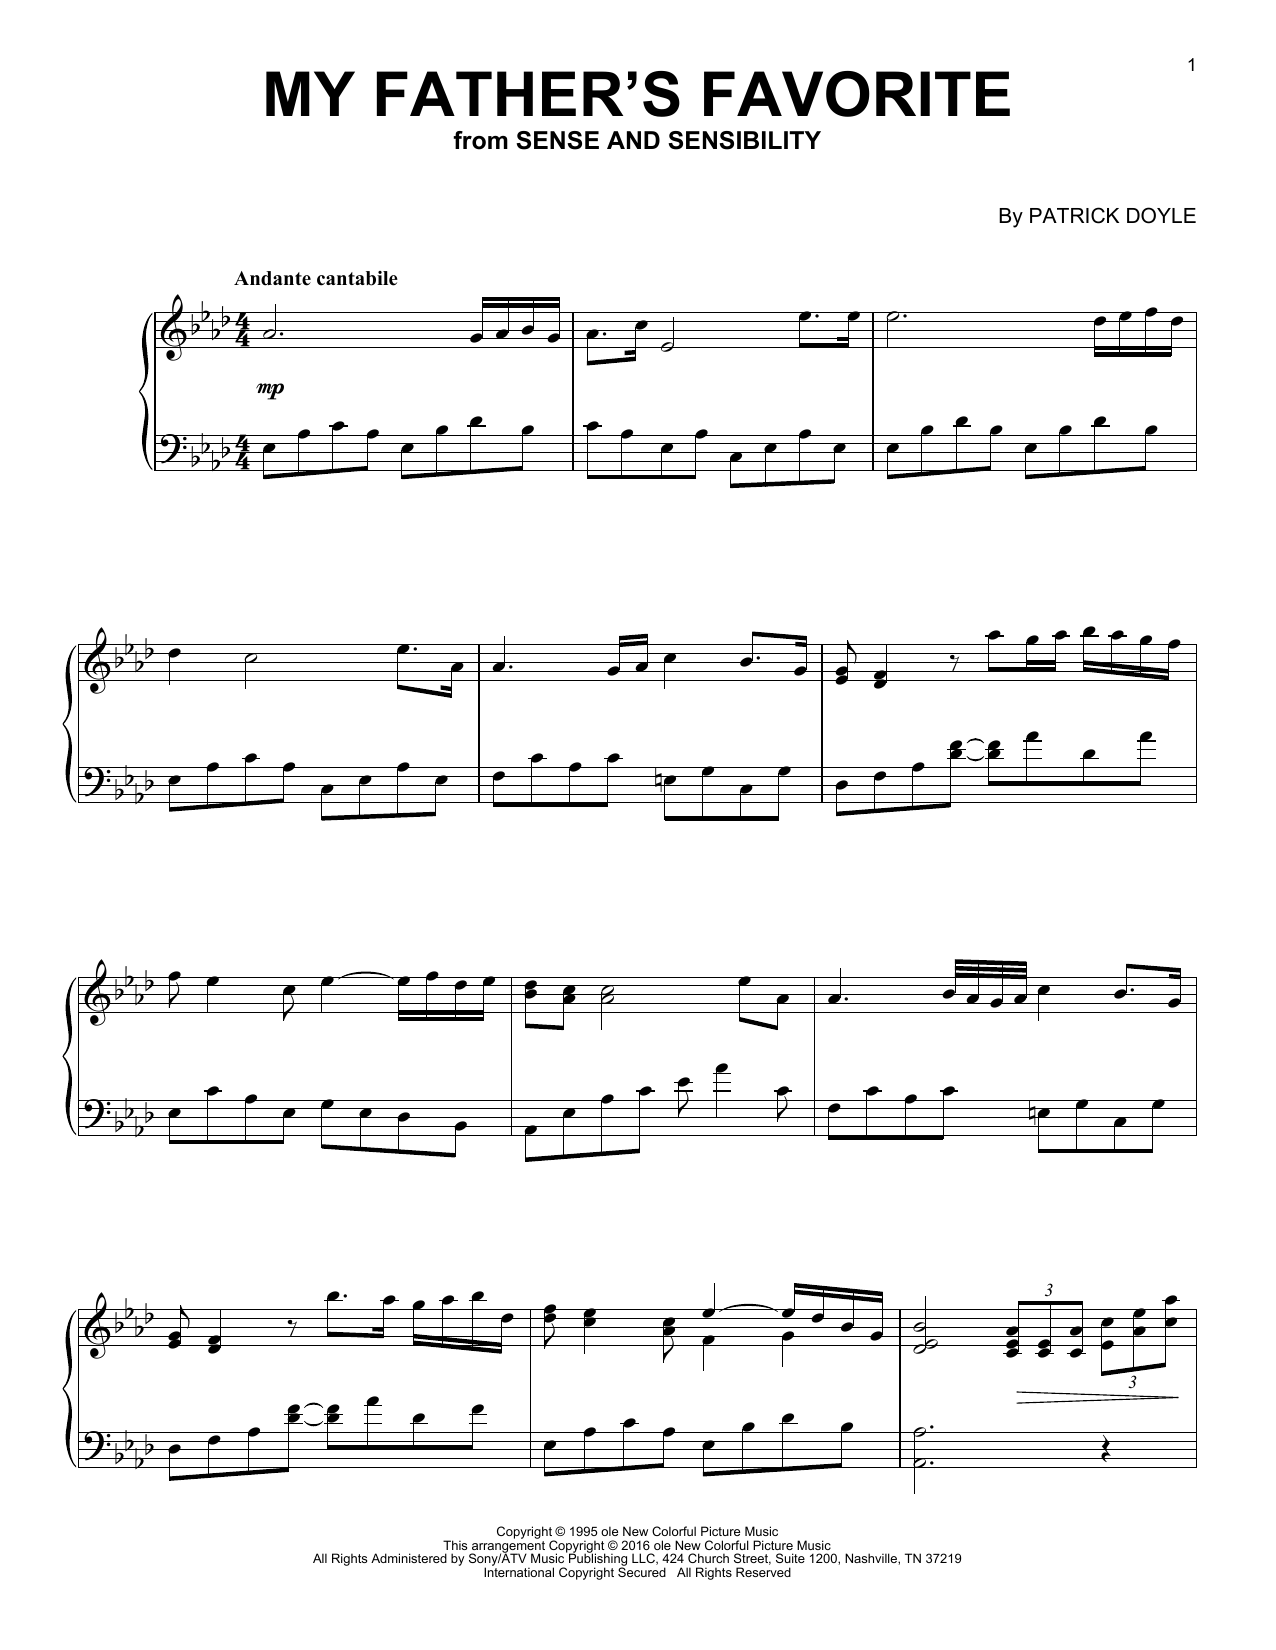 Download Patrick Doyle My Father's Favorite Sheet Music